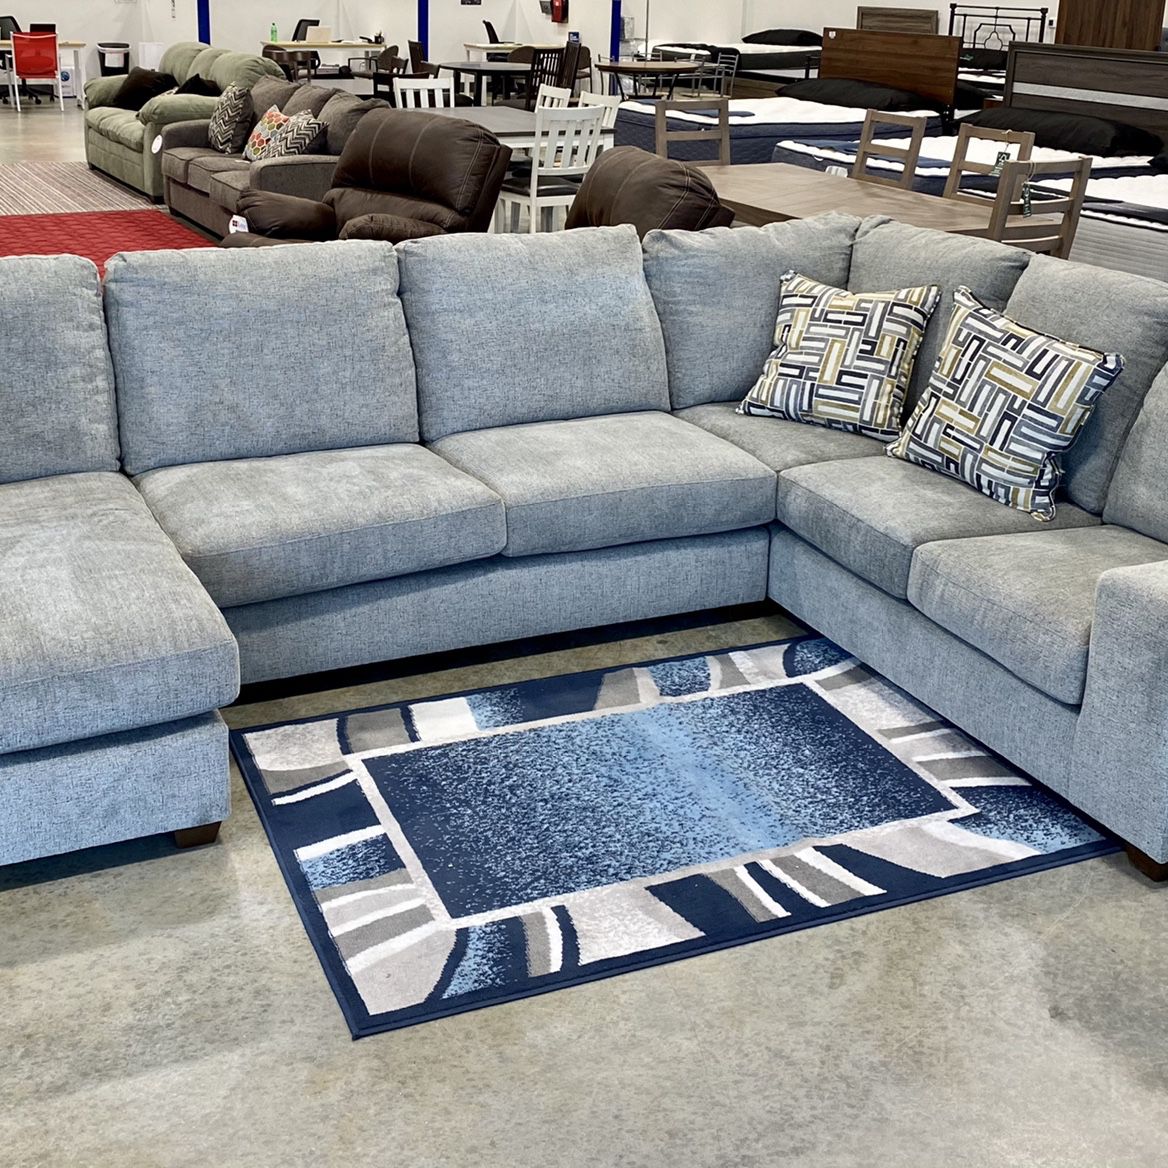 FACTORY OUTLET FURNITURE SALE! 